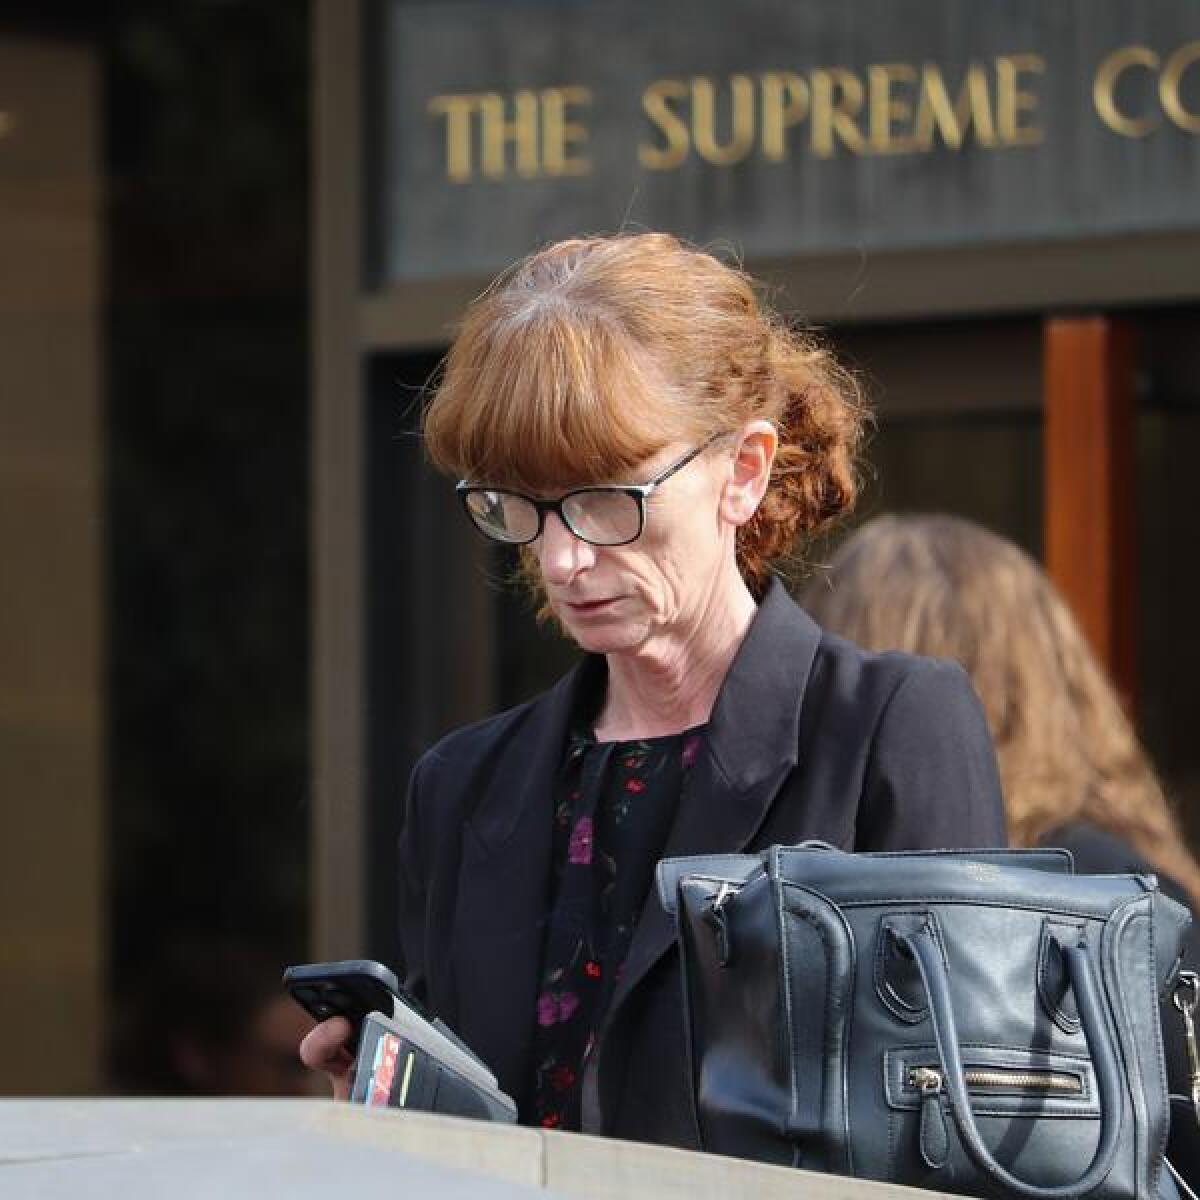 Lisa Anne Perryman leaves the Supreme Court